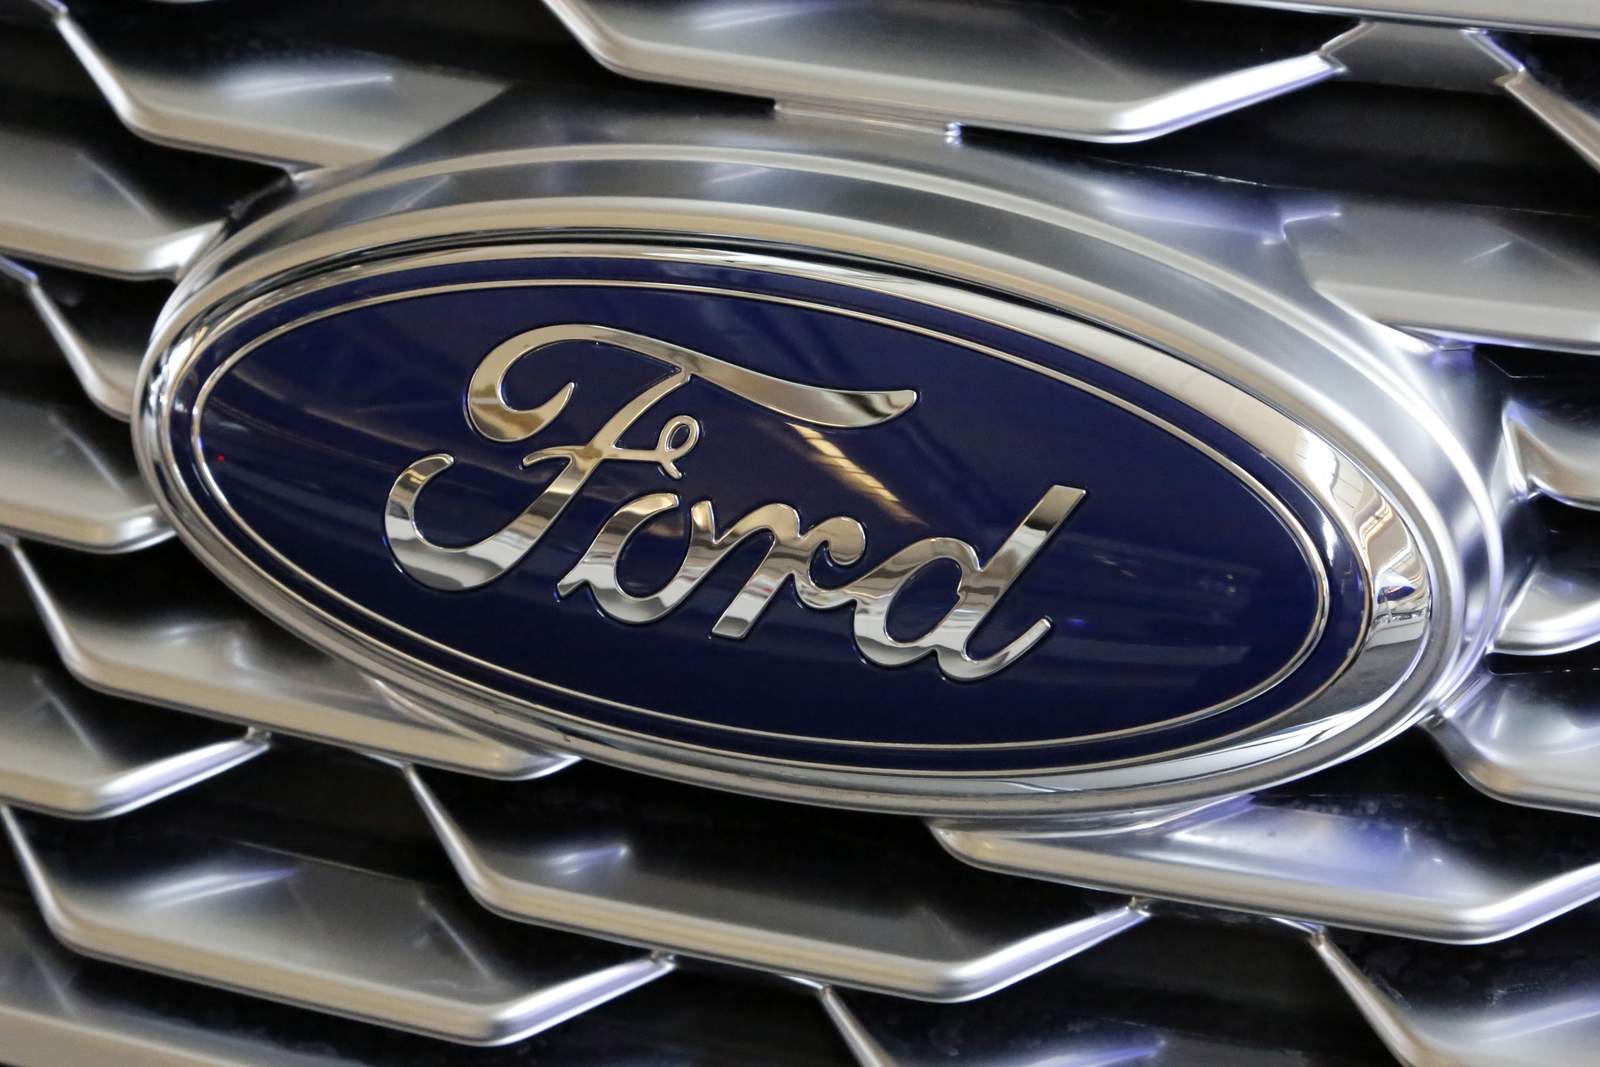 Ford tells 30K employees they can continue working from home under ‘hybrid’ plan